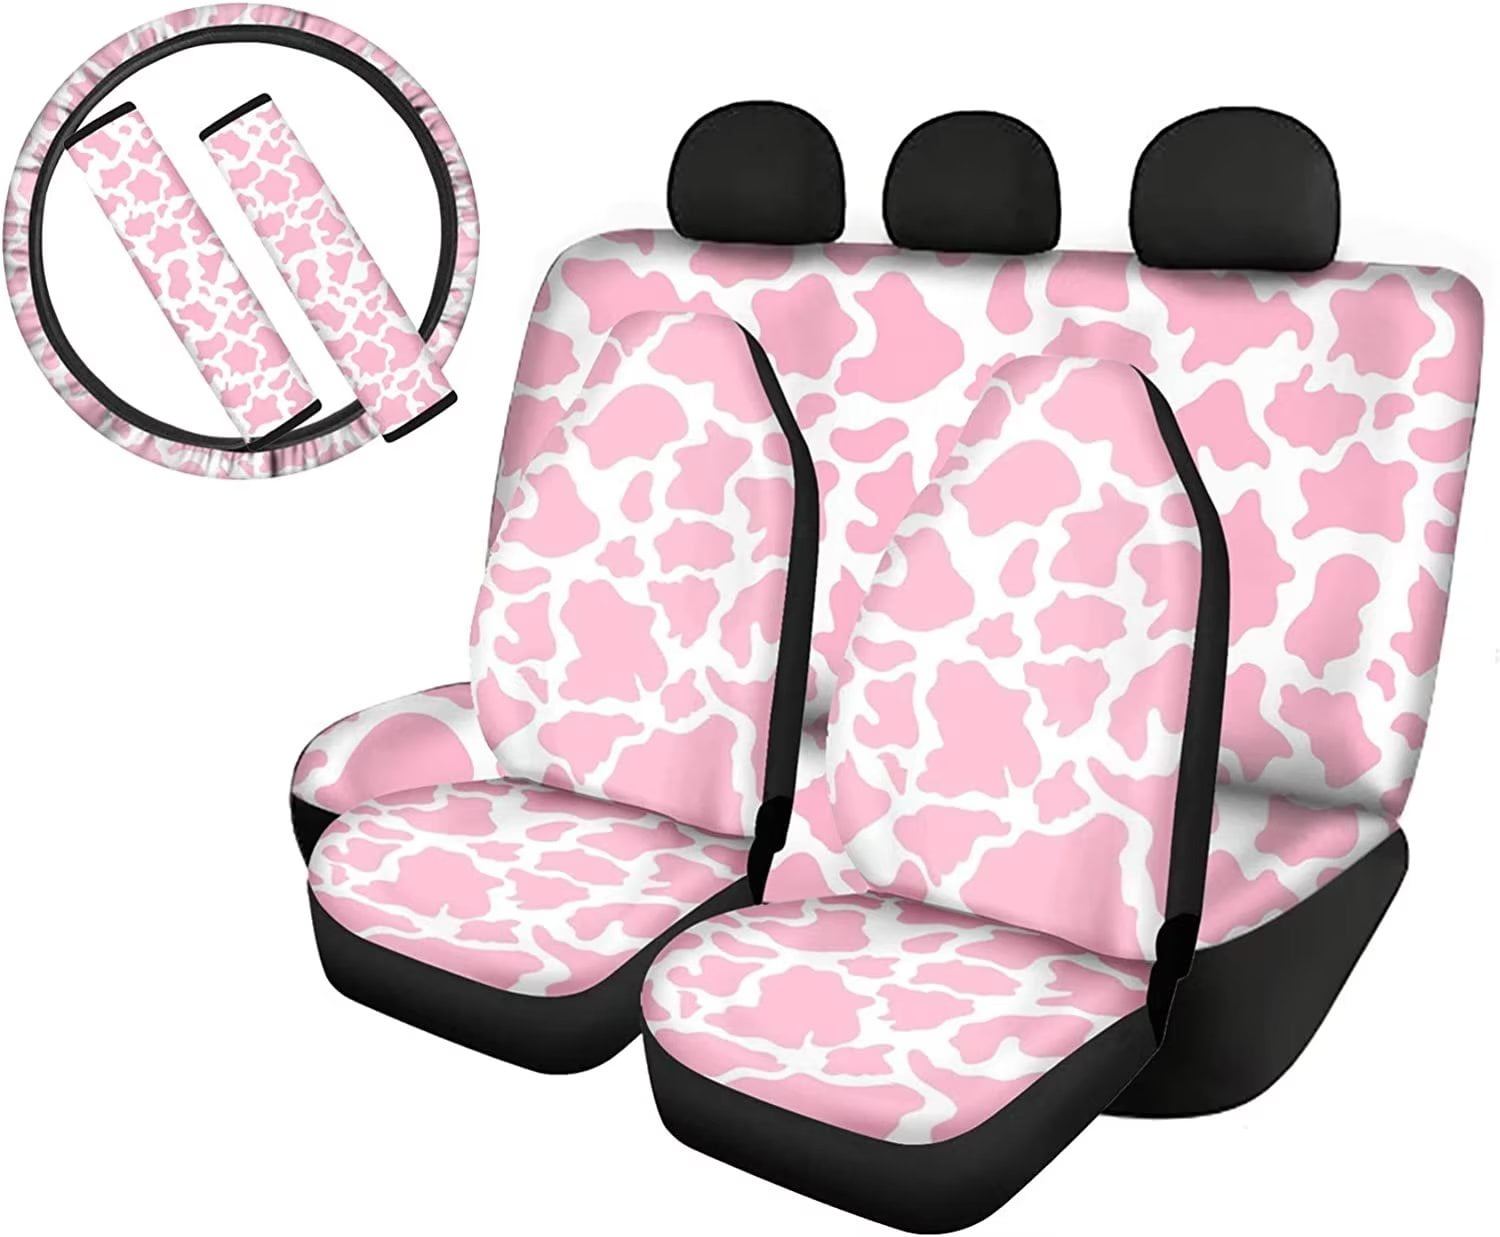 3Pcs/set Universal Plush Car Seat Covers Auto Front Backrest Seat Cushion  Protector Pad Interior Accessories (Beige/Pink/Black/Grey)